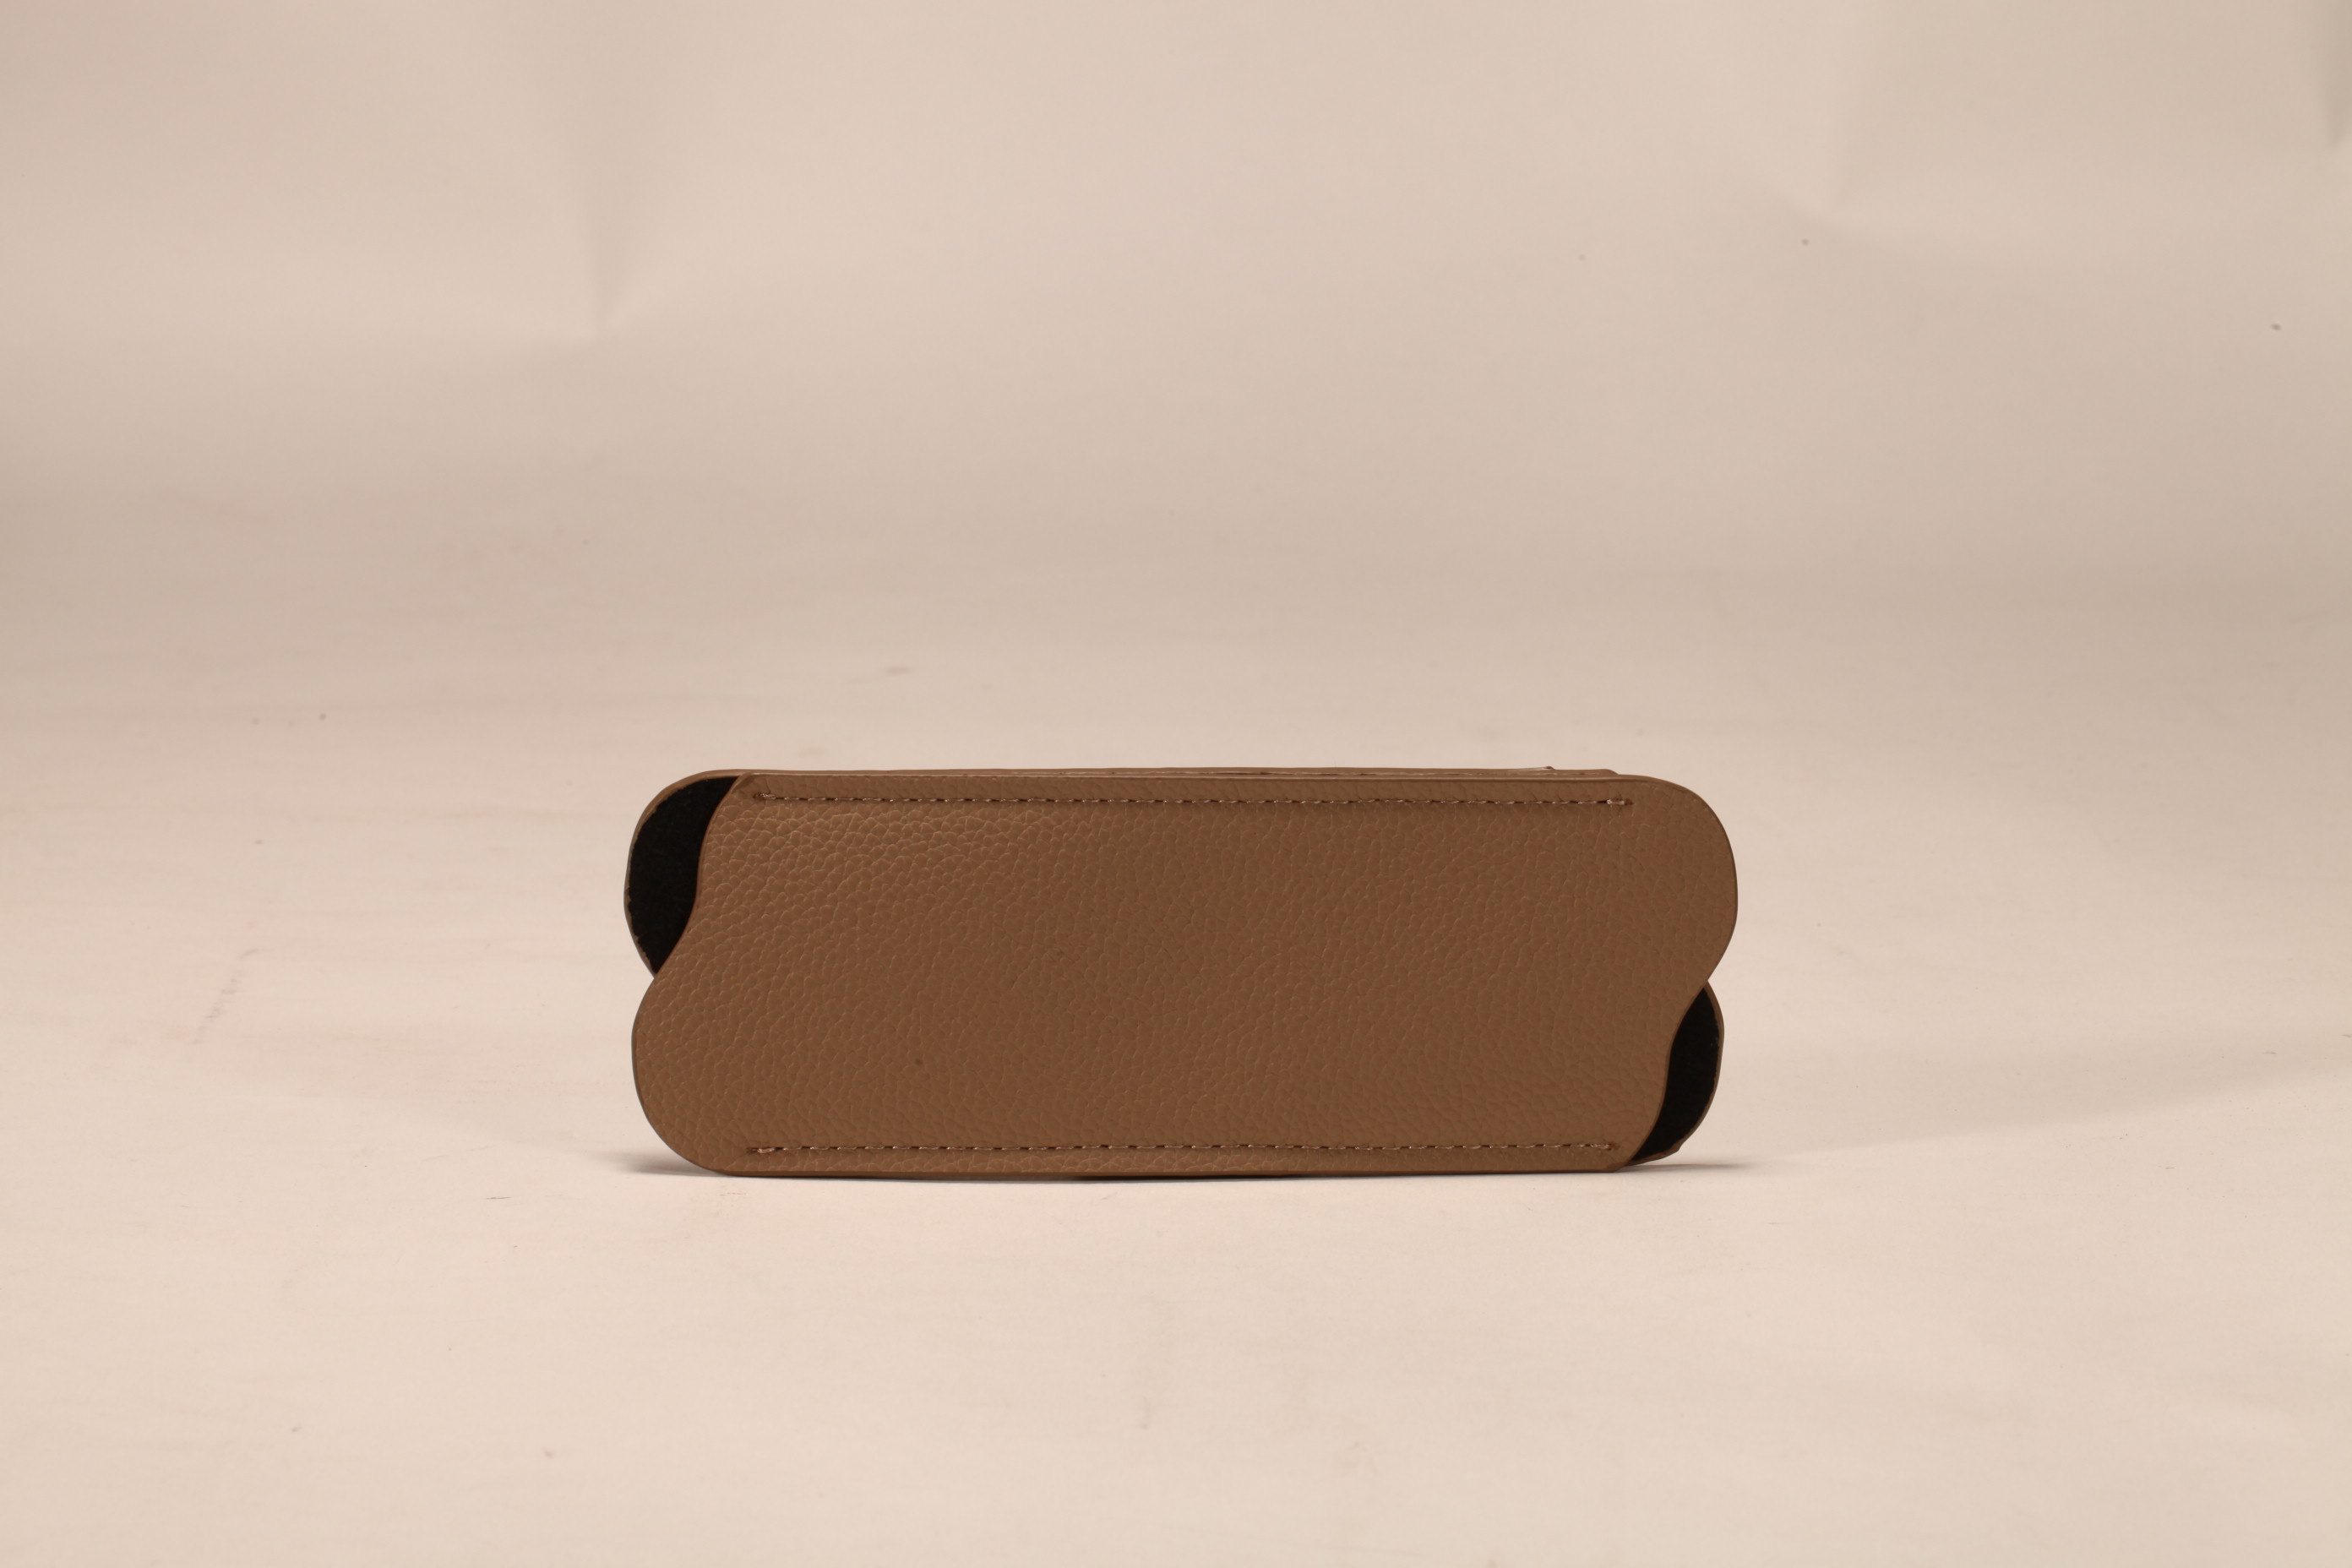 Three types of glasses leather case, easy to carry, small and delicate